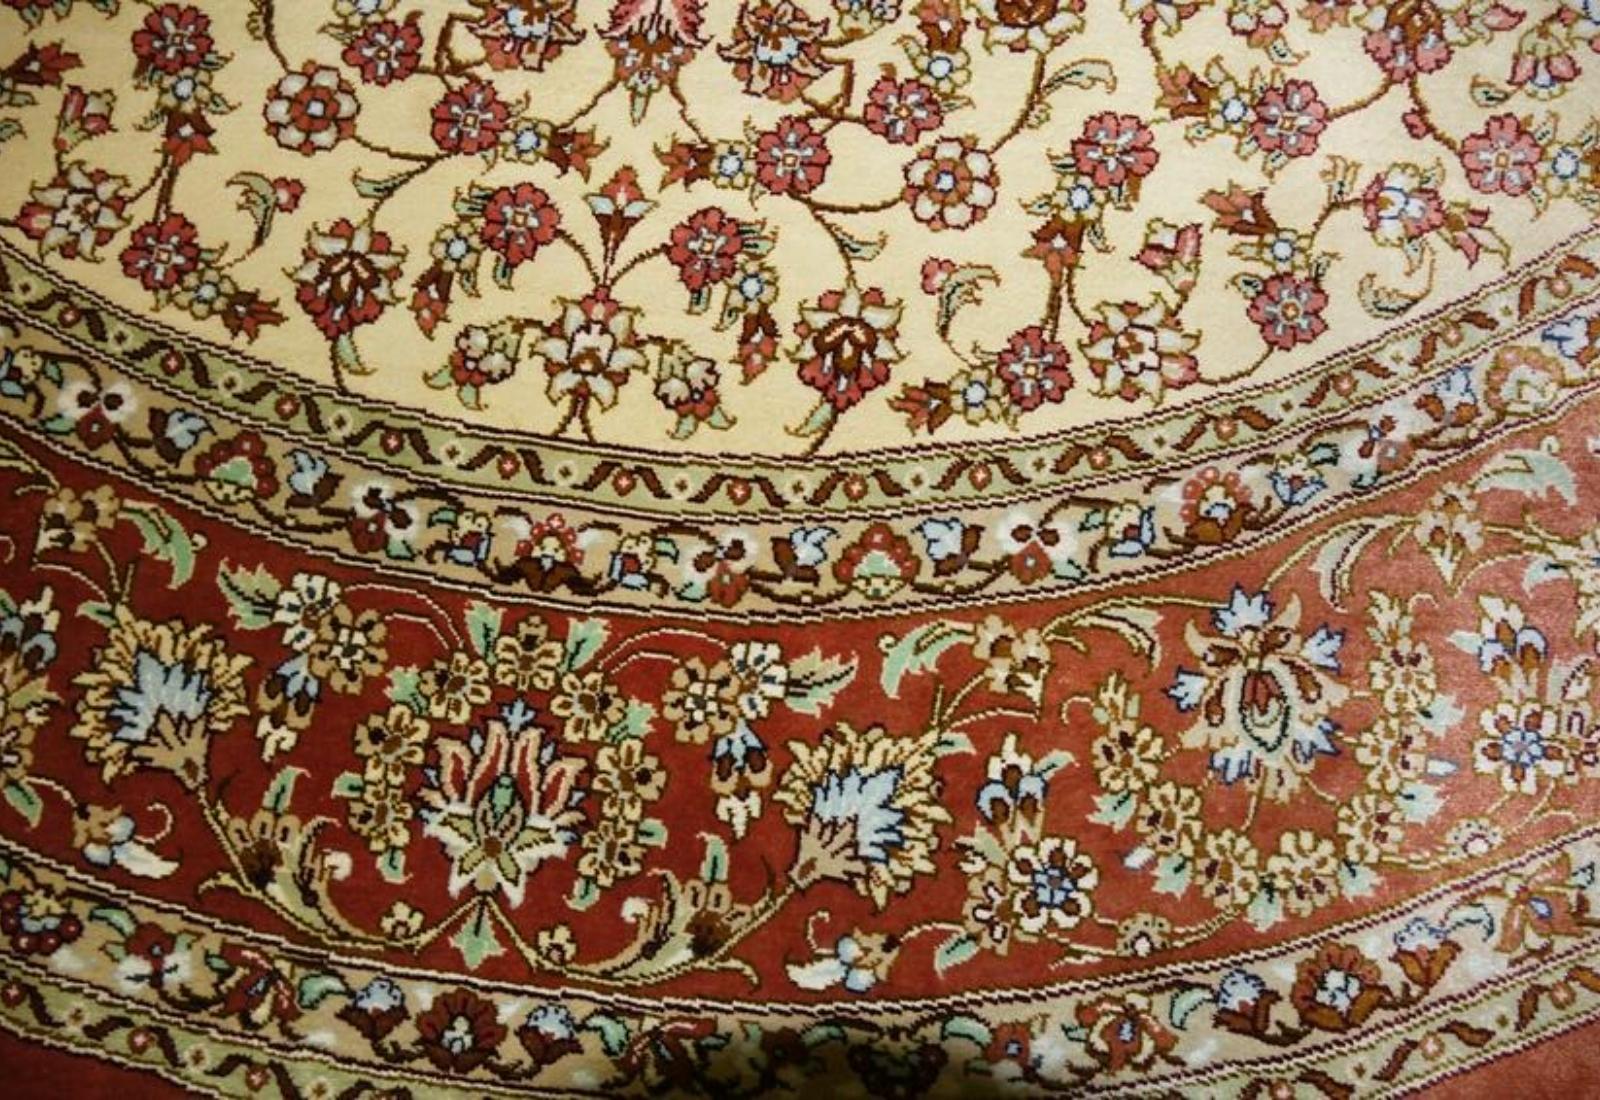 Very fine Persian Silk Qum - 5' 5' In Good Condition For Sale In Newmanstown, PA